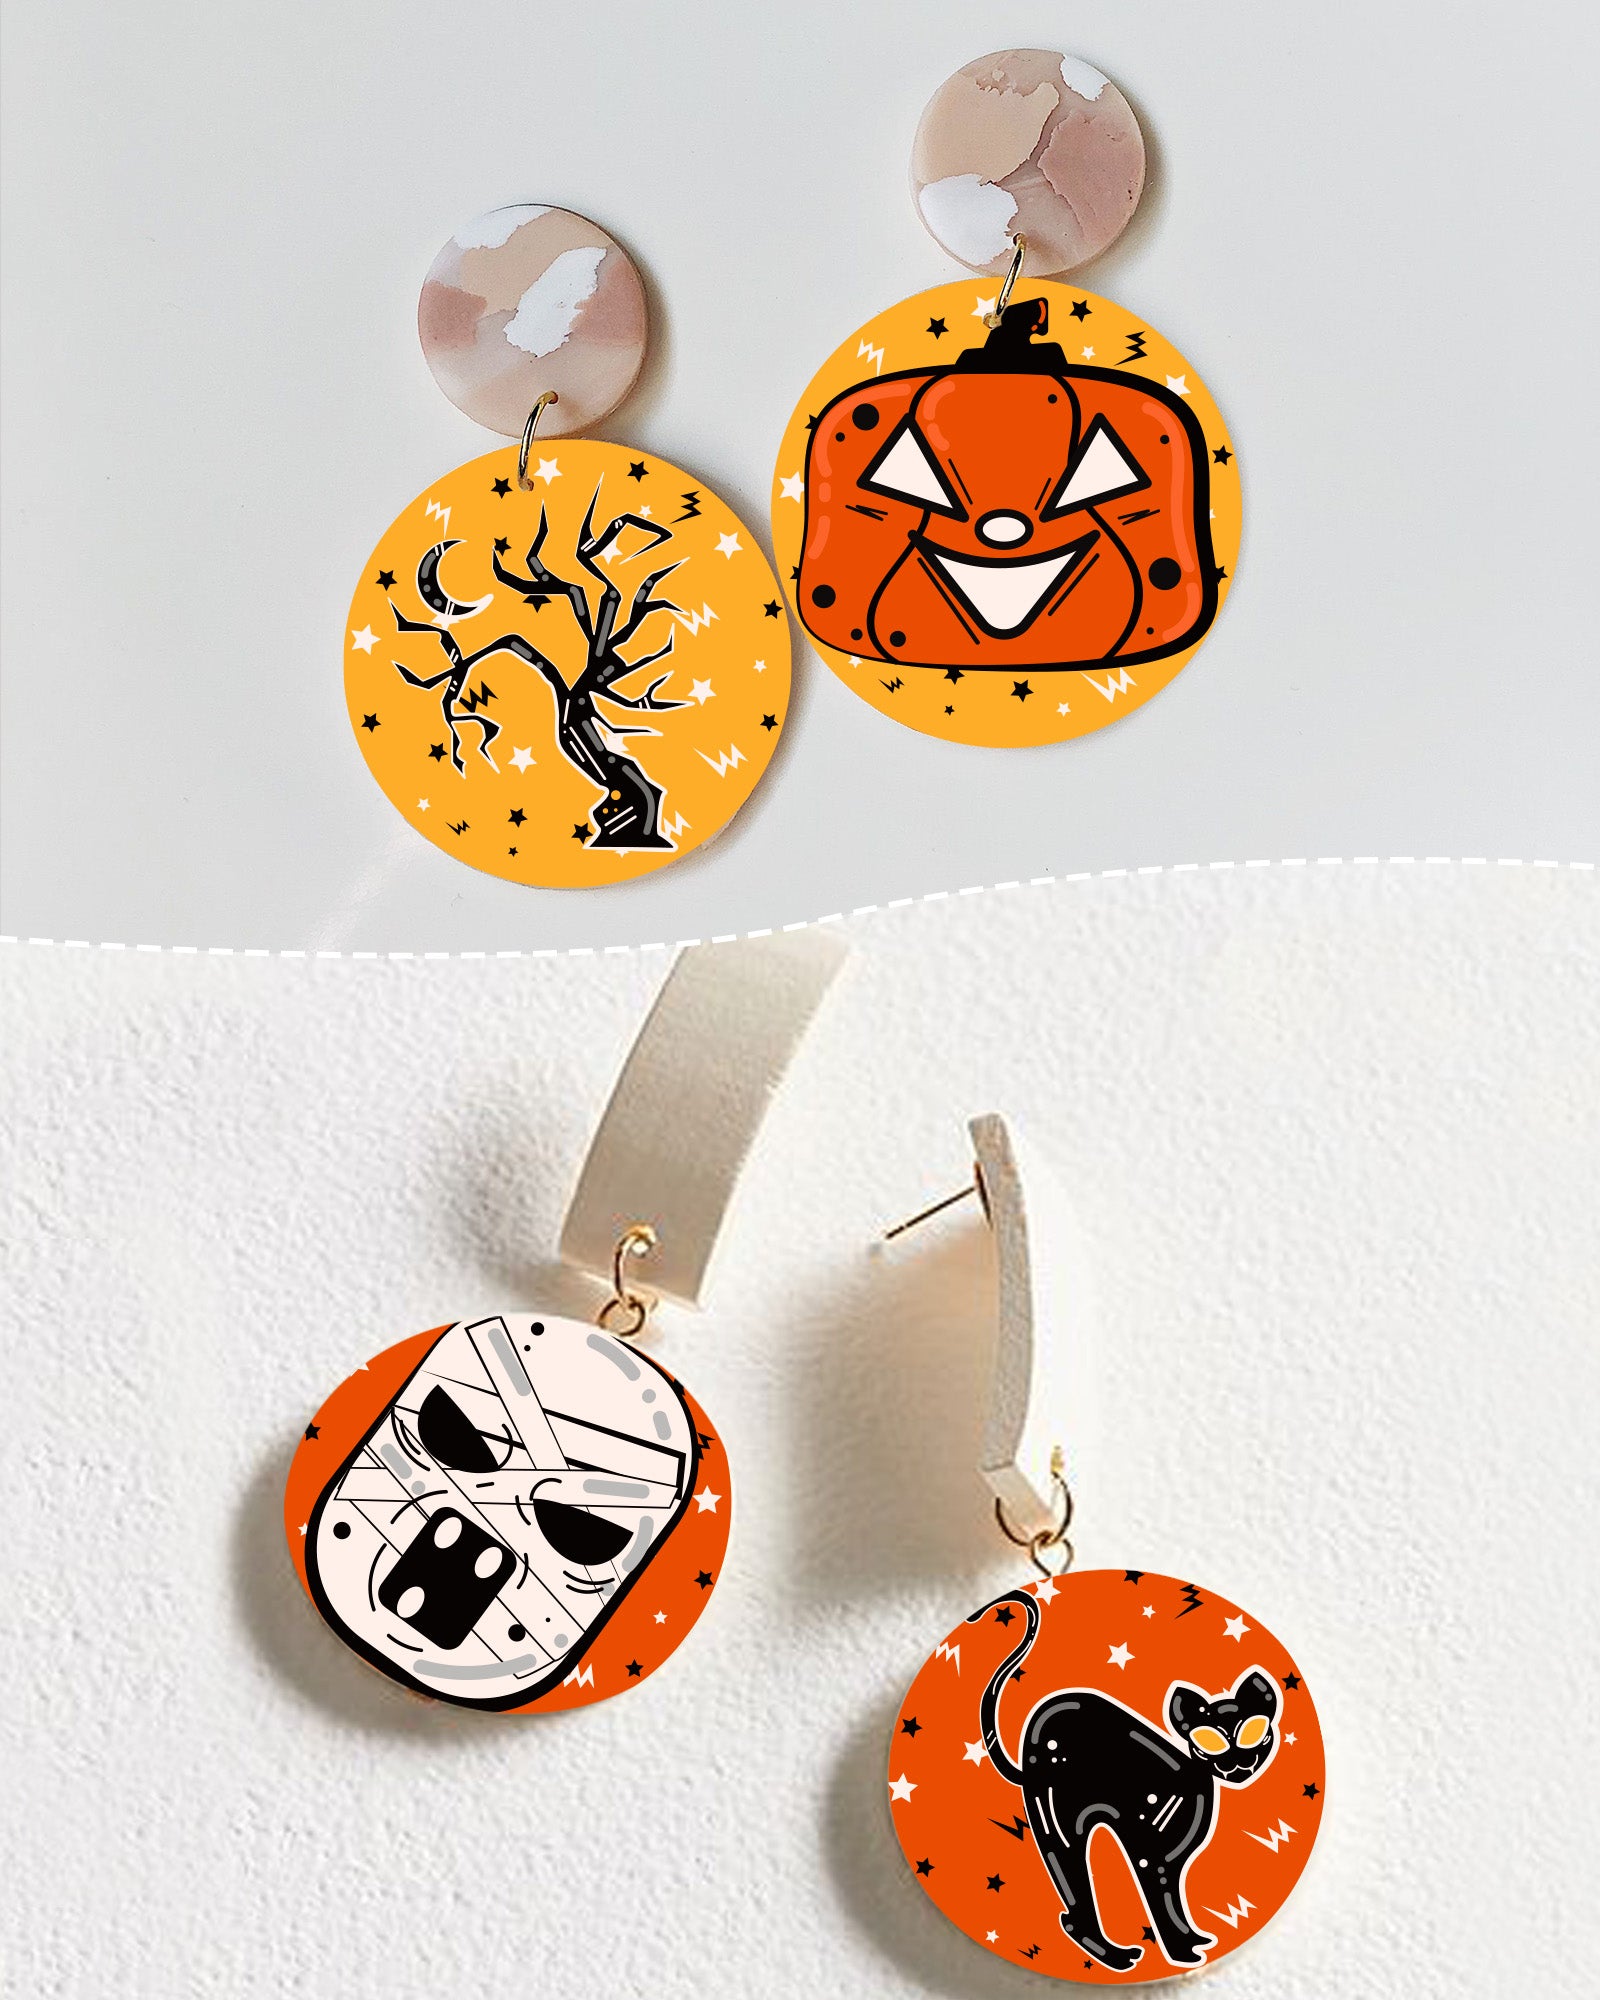 Puocaon Halloween Clay Transfer Paper - 3 Design 15 Pcs